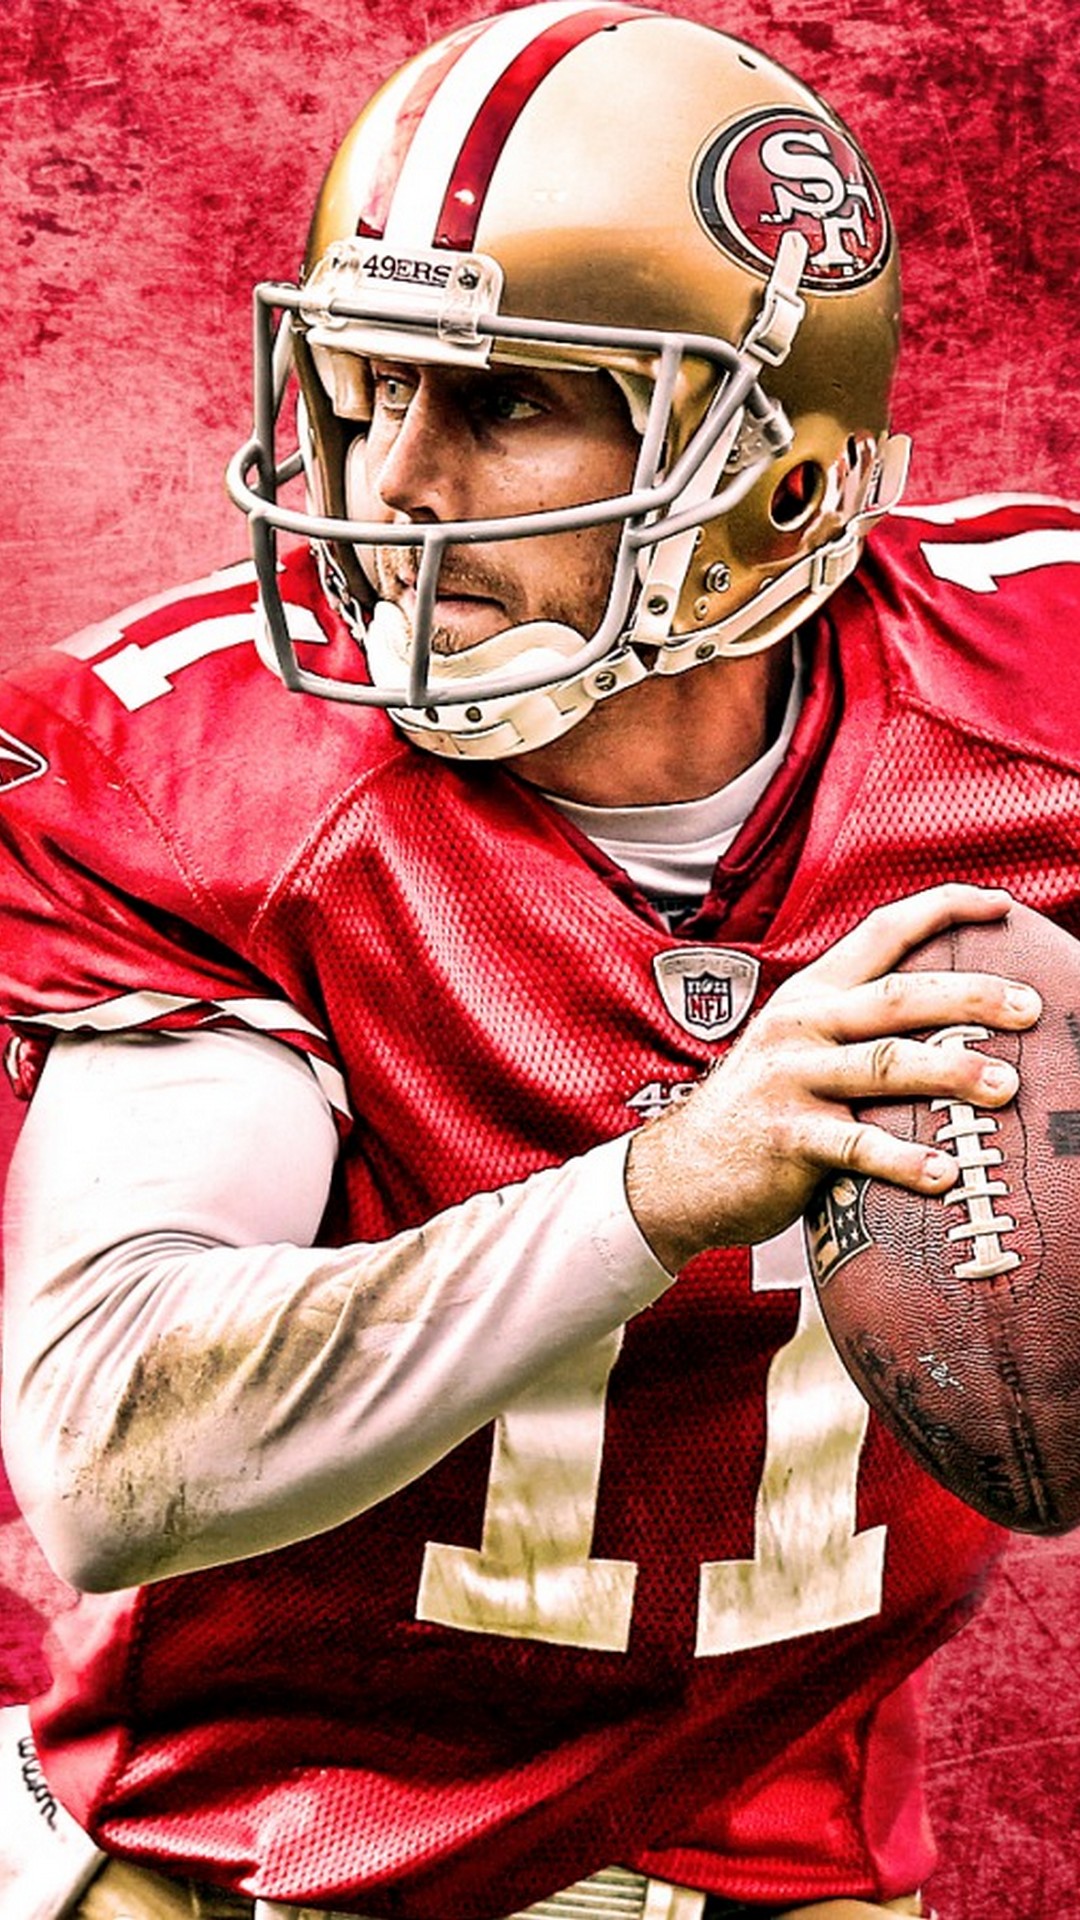 49ers iPhone Wallpaper Lock Screen With high-resolution 1080X1920 pixel. Download and set as wallpaper for Desktop Computer, Apple iPhone X, XS Max, XR, 8, 7, 6, SE, iPad, Android